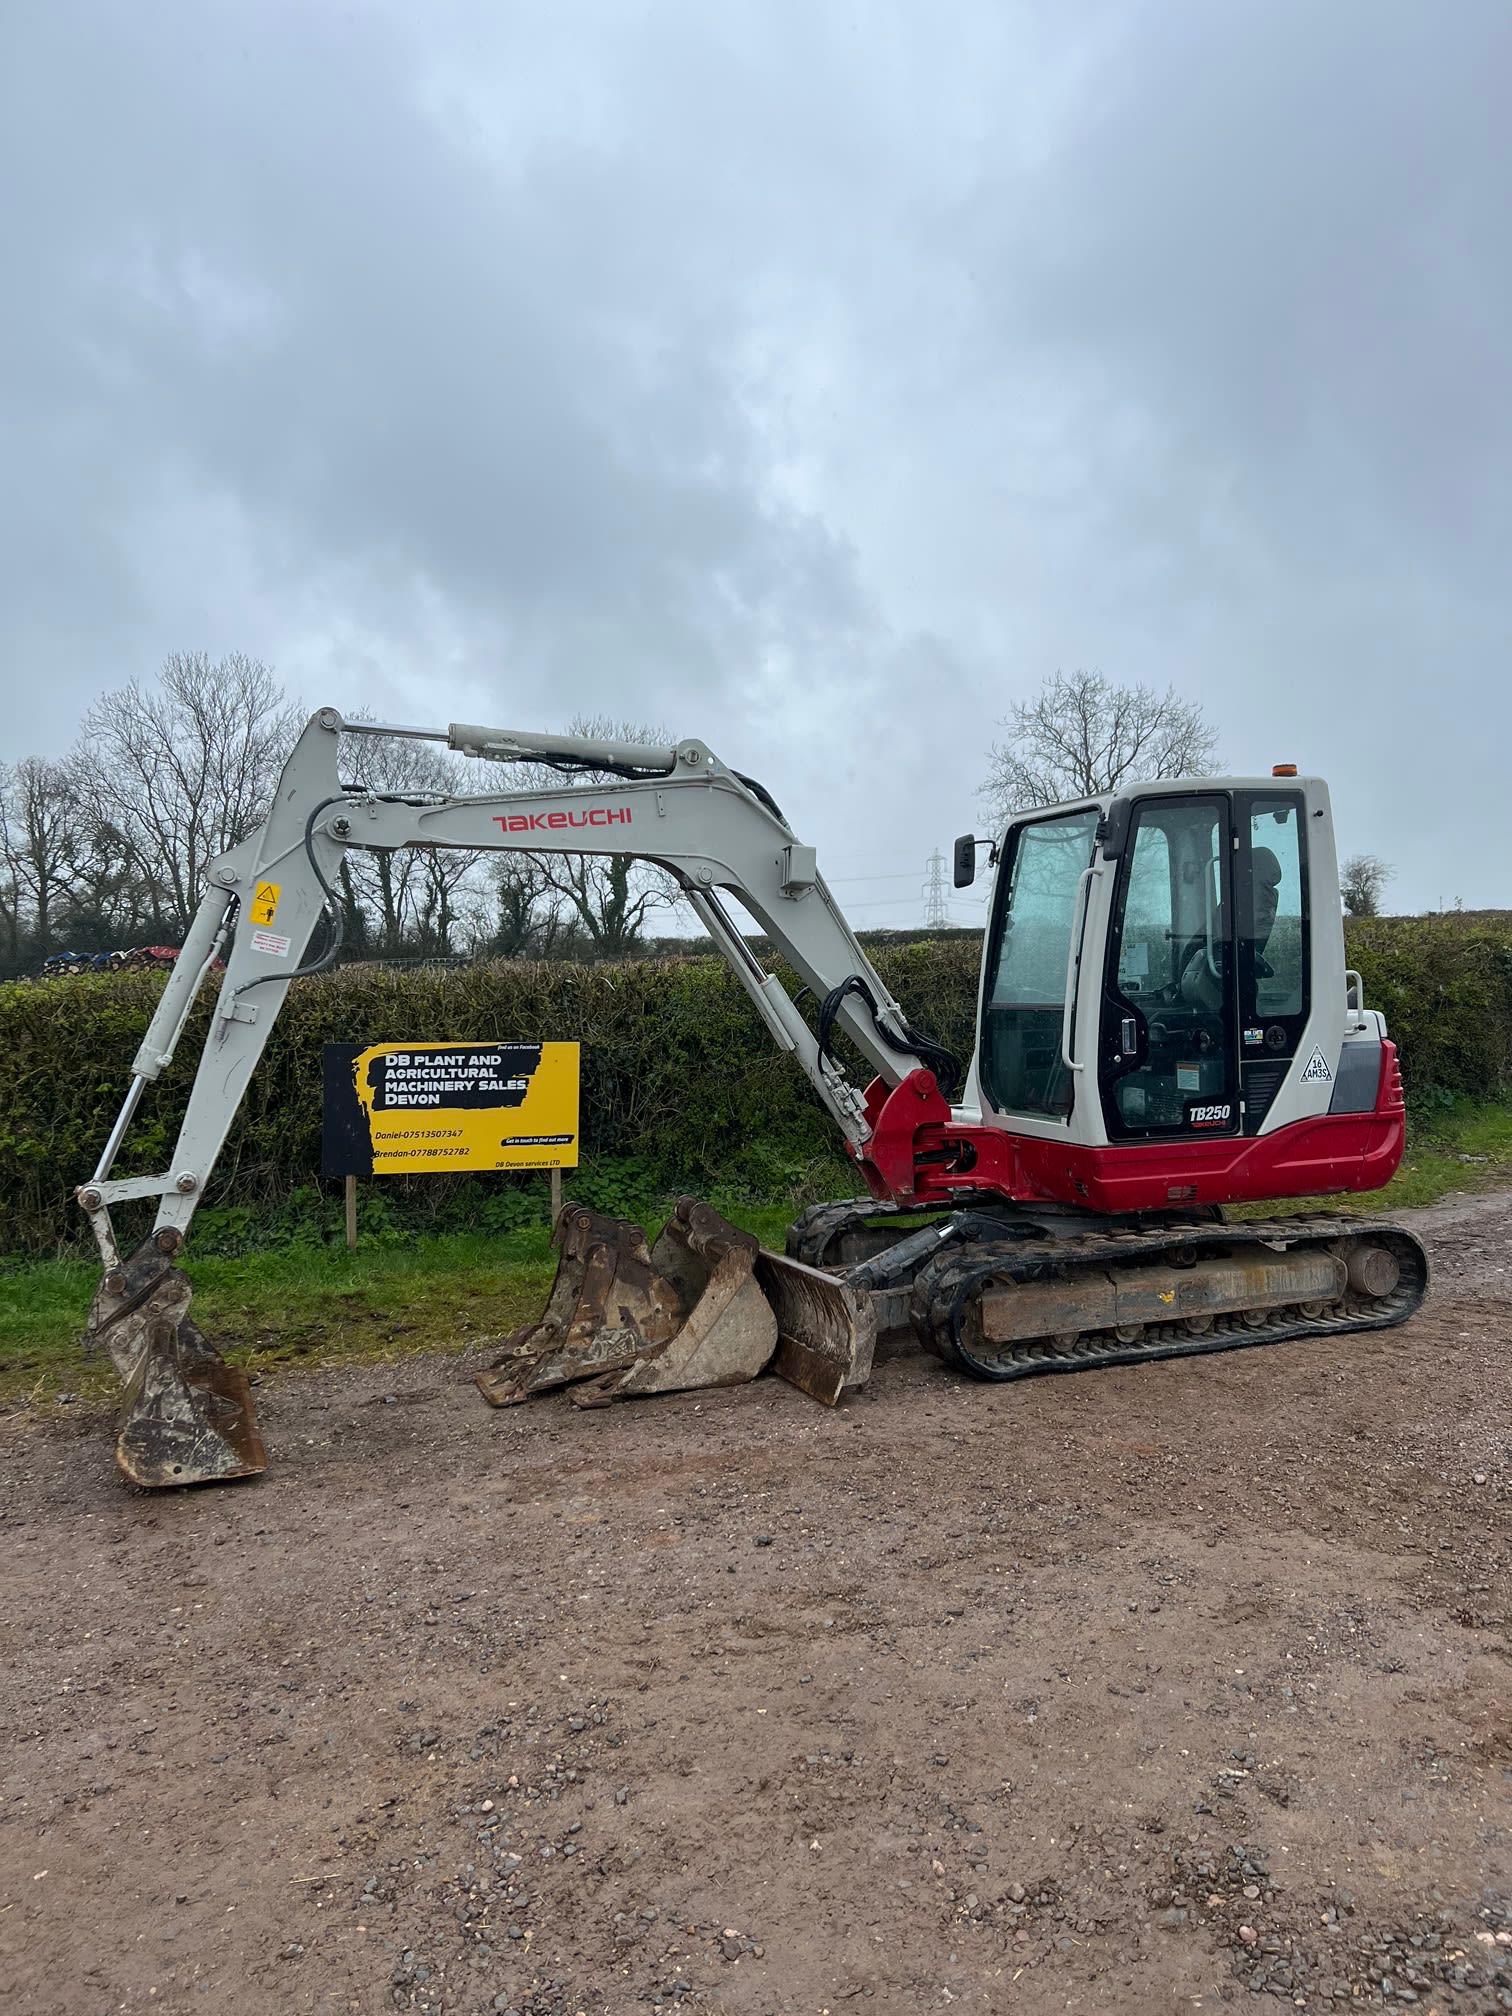 Images DB Plant and Agricultural Machinery Sales Devon